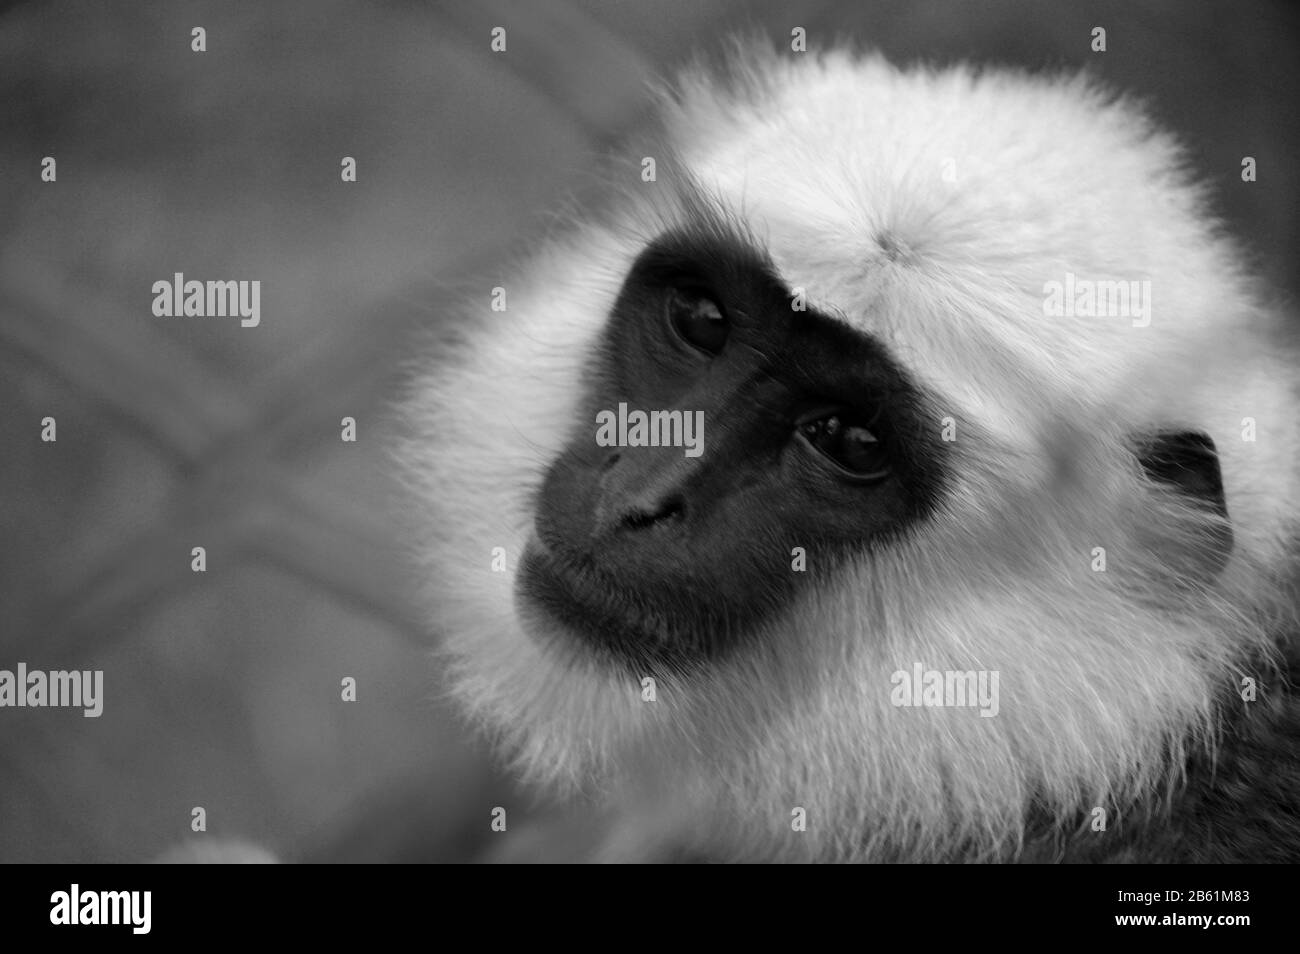 An innocent Monkey viewing inside the bars of zoos. Stock Photo